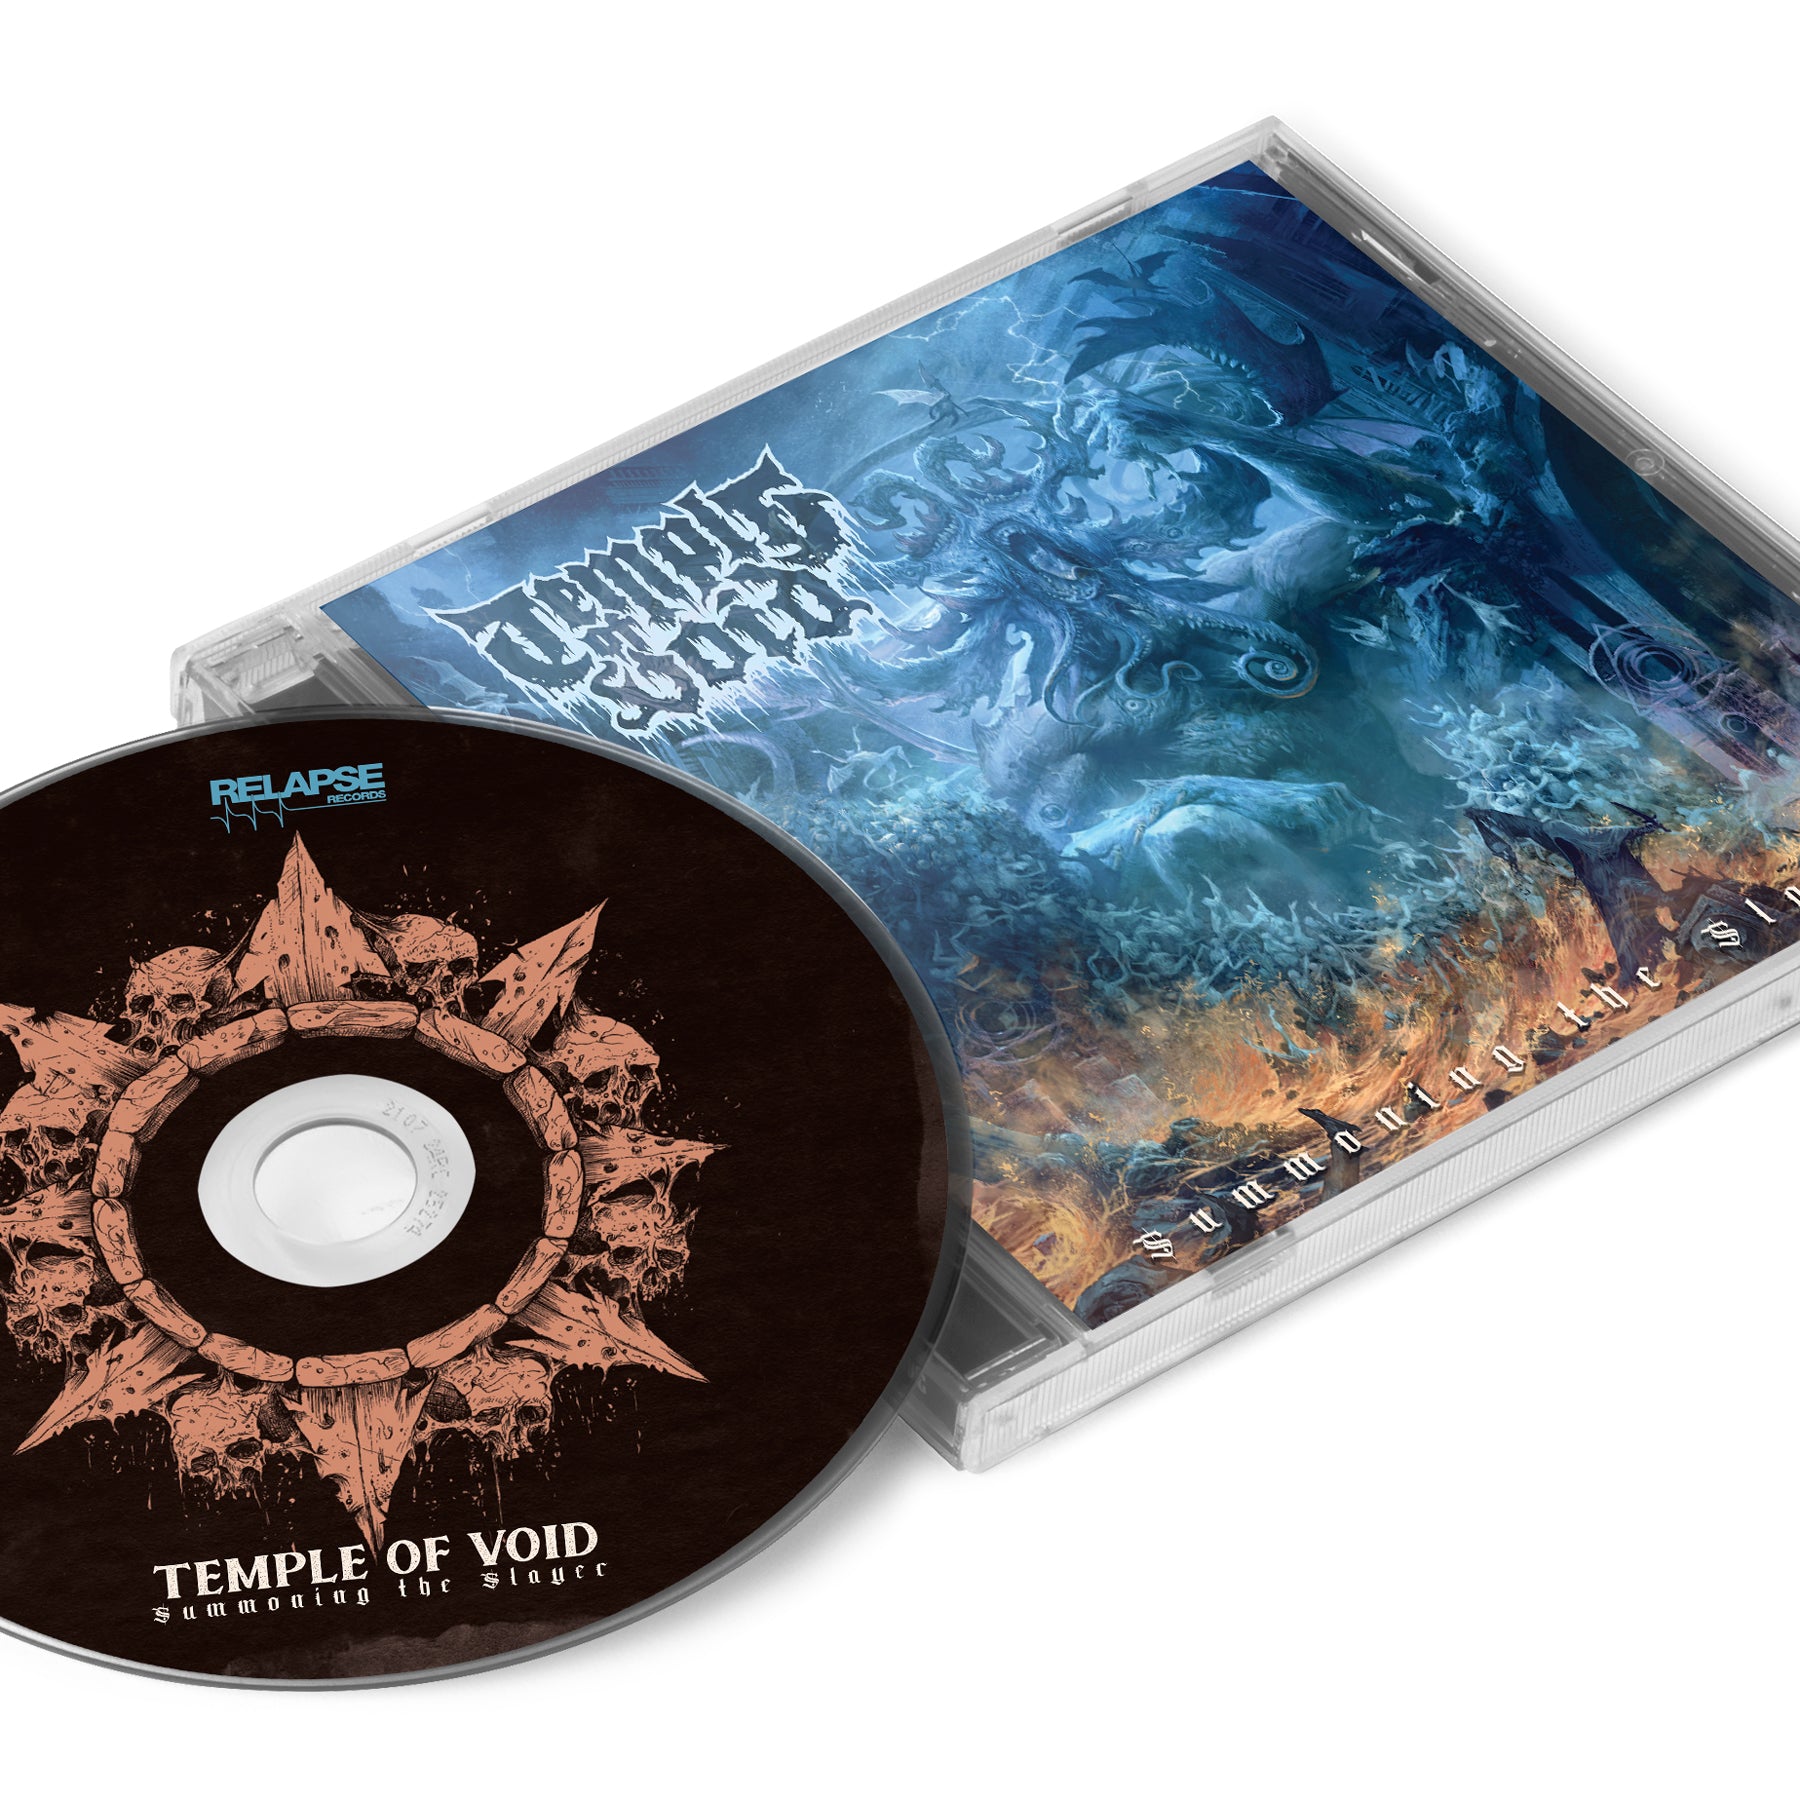 Temple of Void "Summoning the Slayer" CD